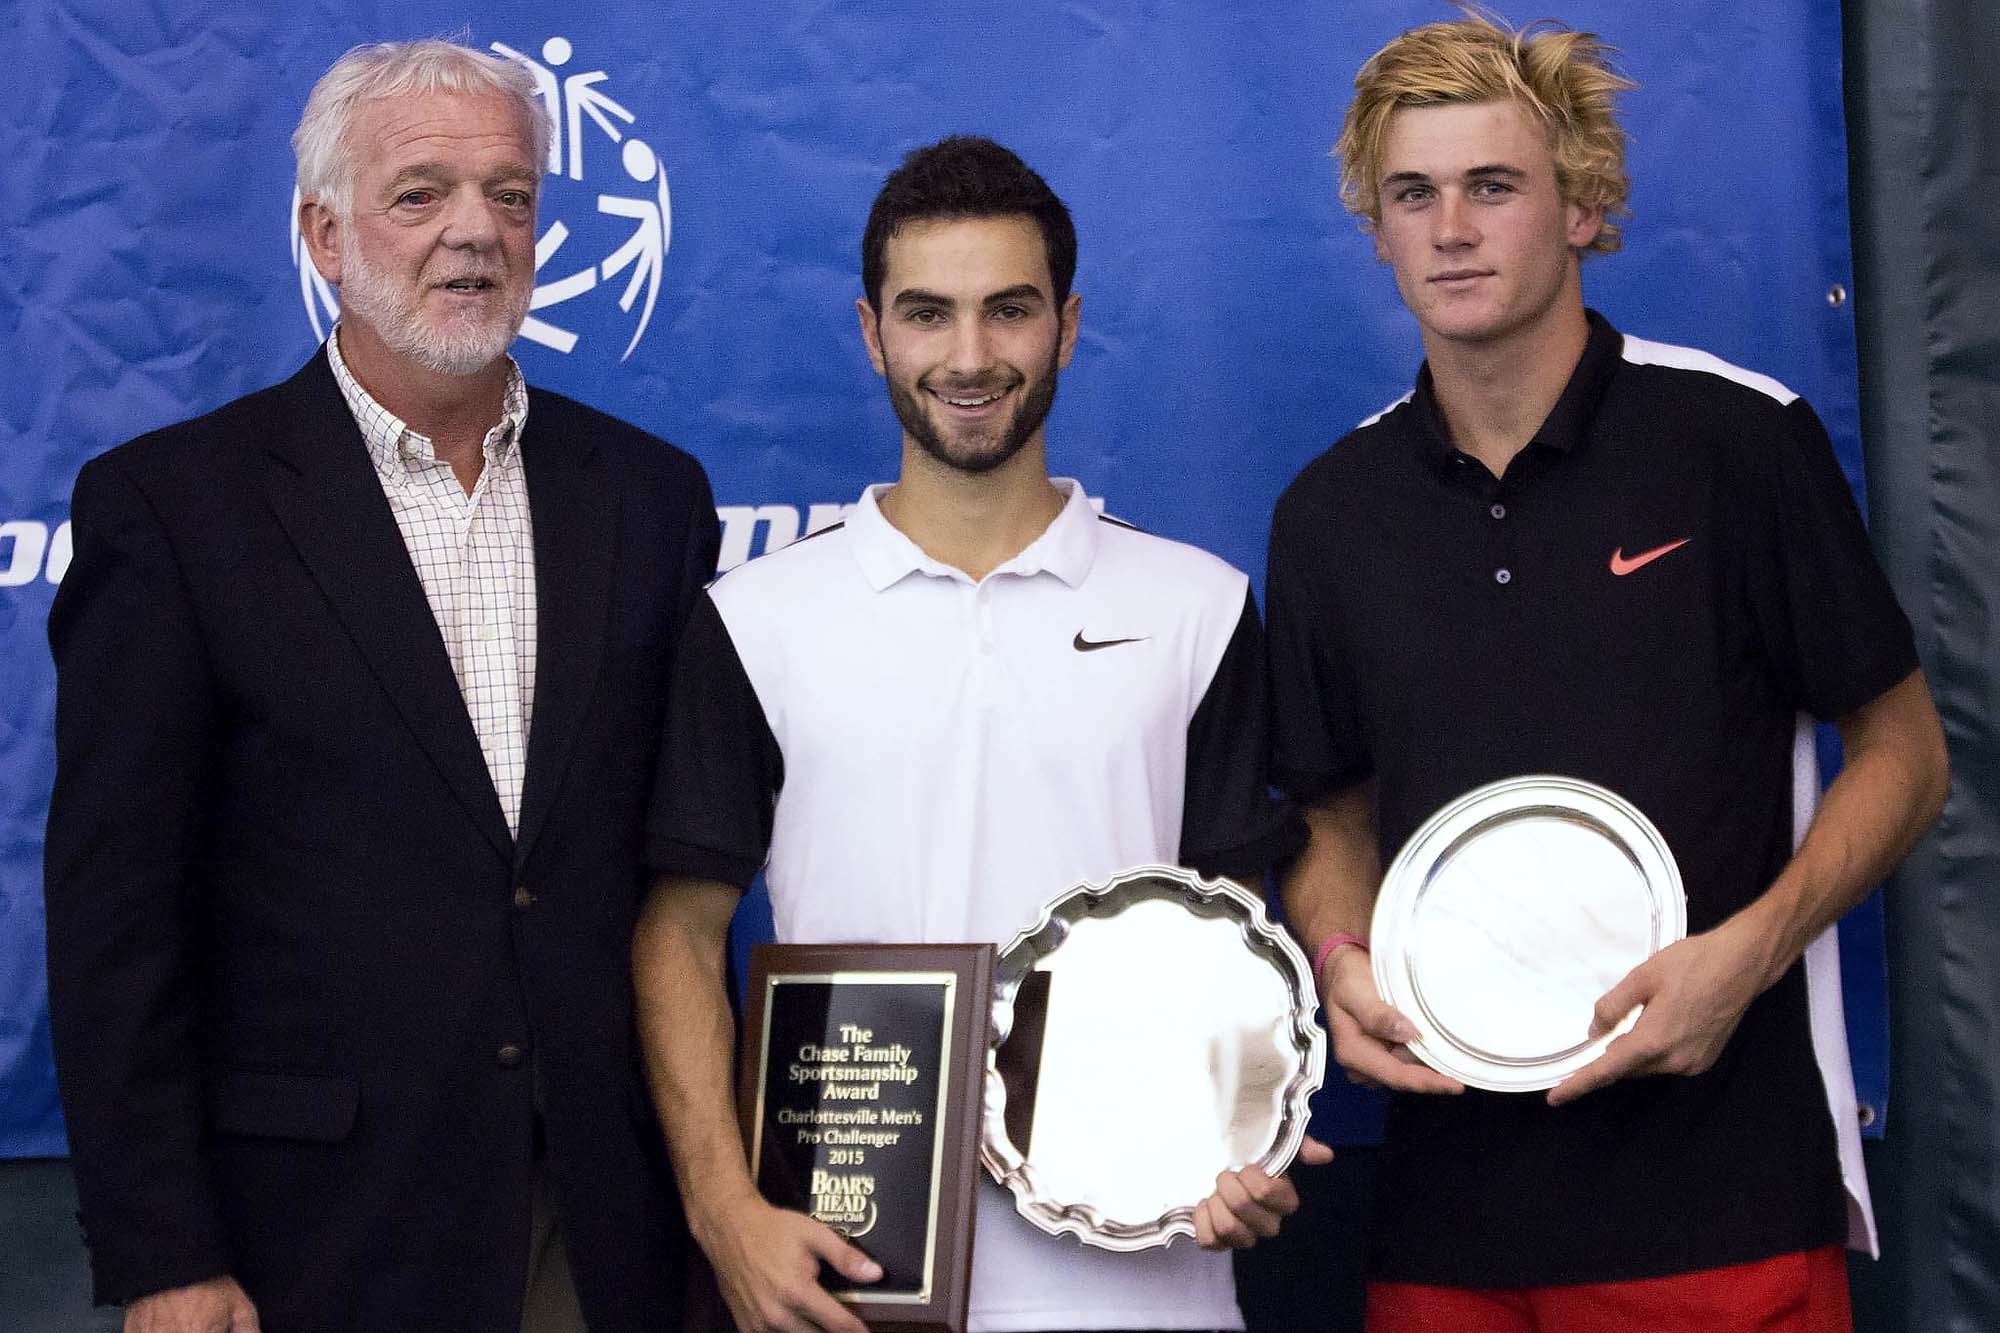 Manilla, left, stands with Noah Rubin and Tommy Paul